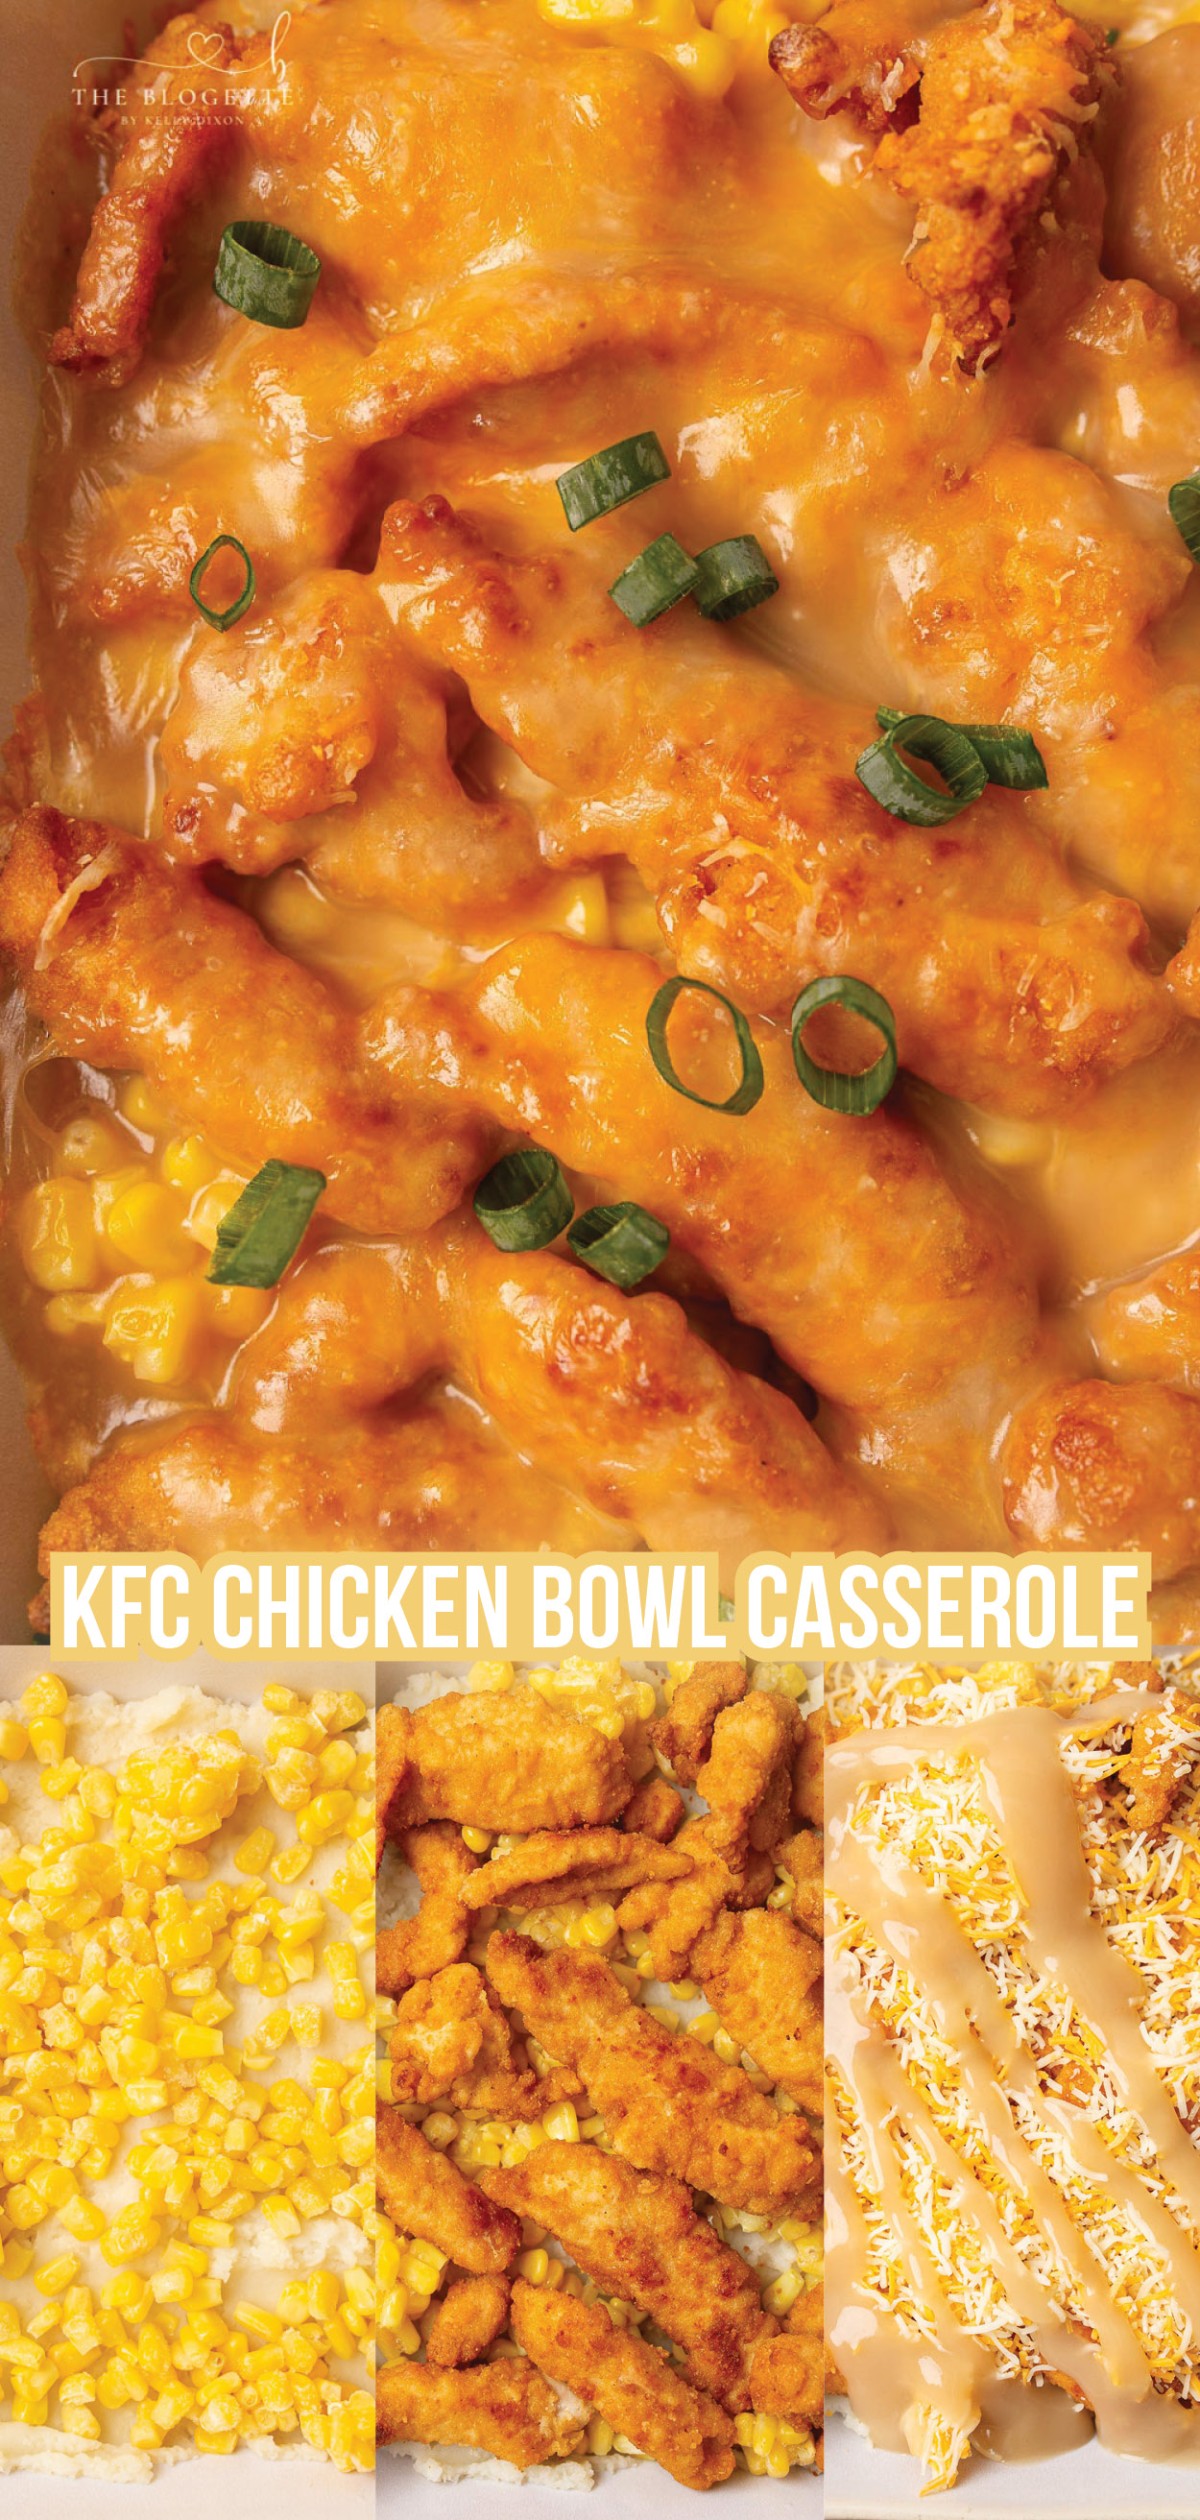 KFC Chicken Bowl Casserole This KFC Famous Bowl Casserole has become a huge hit in our house and is SUPER easy to make. It's a great recipe for kids to help with too! 